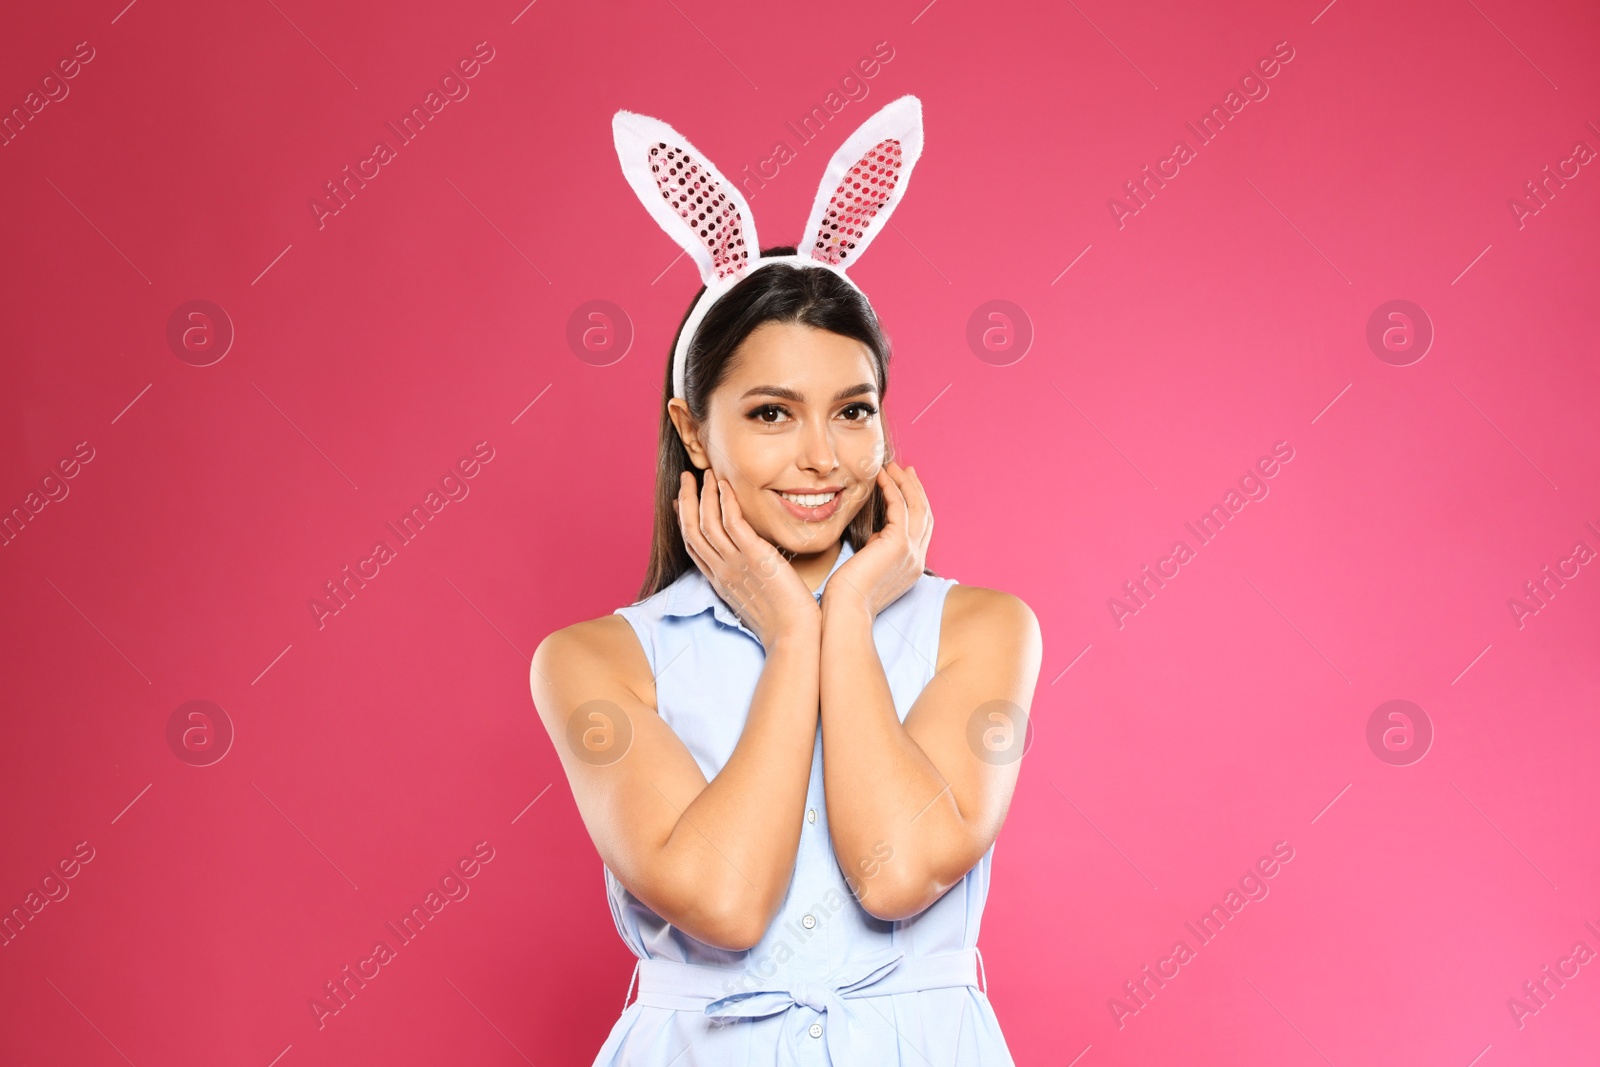 Photo of Portrait of beautiful woman in Easter bunny ears headband on color background